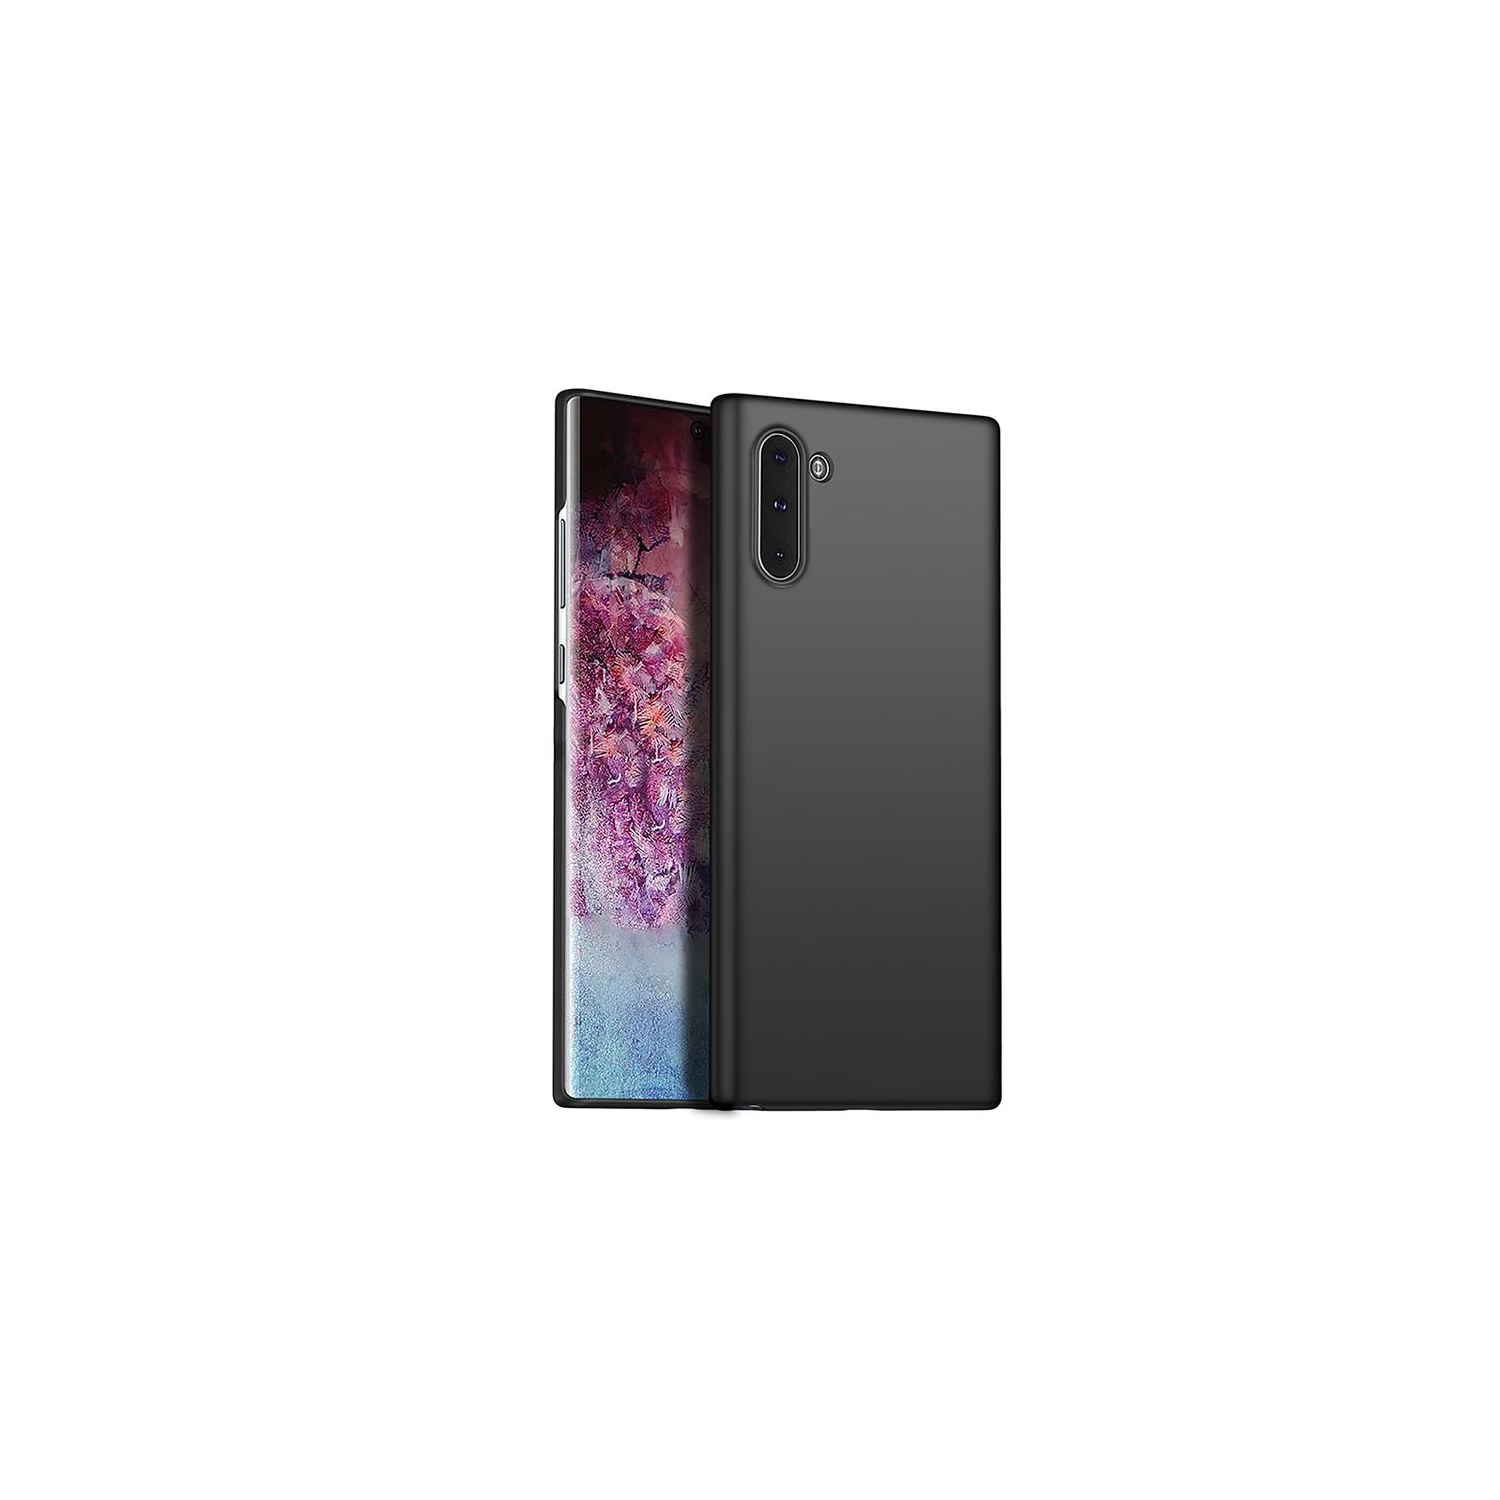 PANDACO Hard Shell Matte Black Case for Samsung Galaxy Note 10